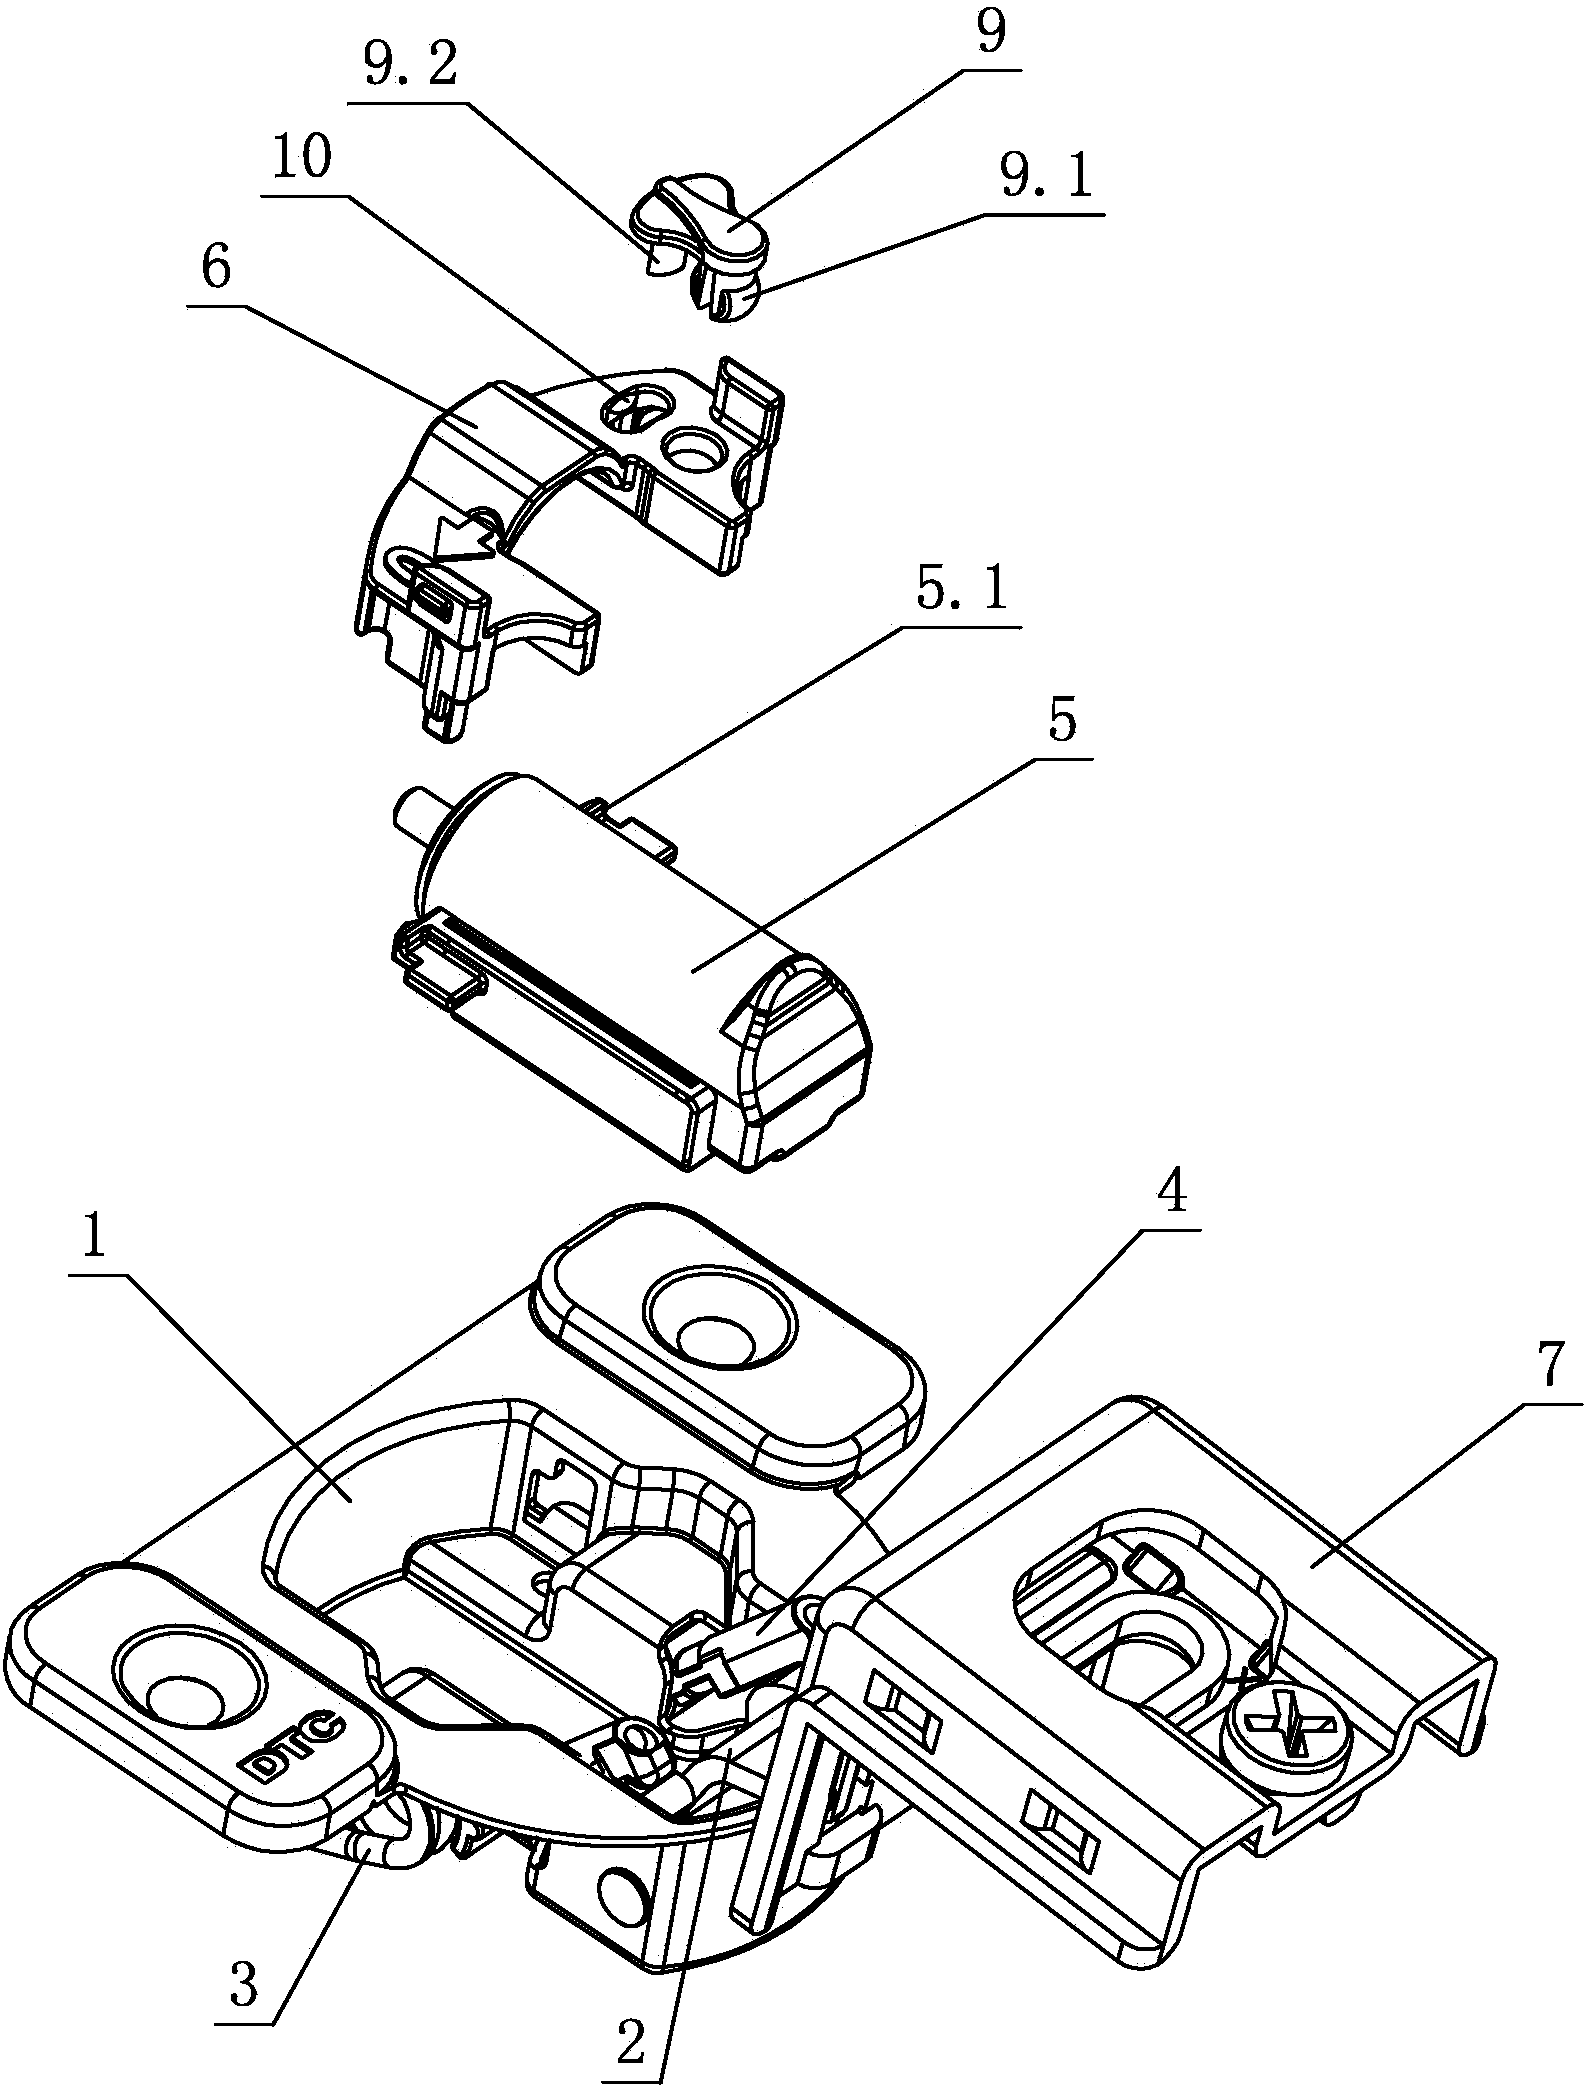 Hinge device capable of locking buffer switch position